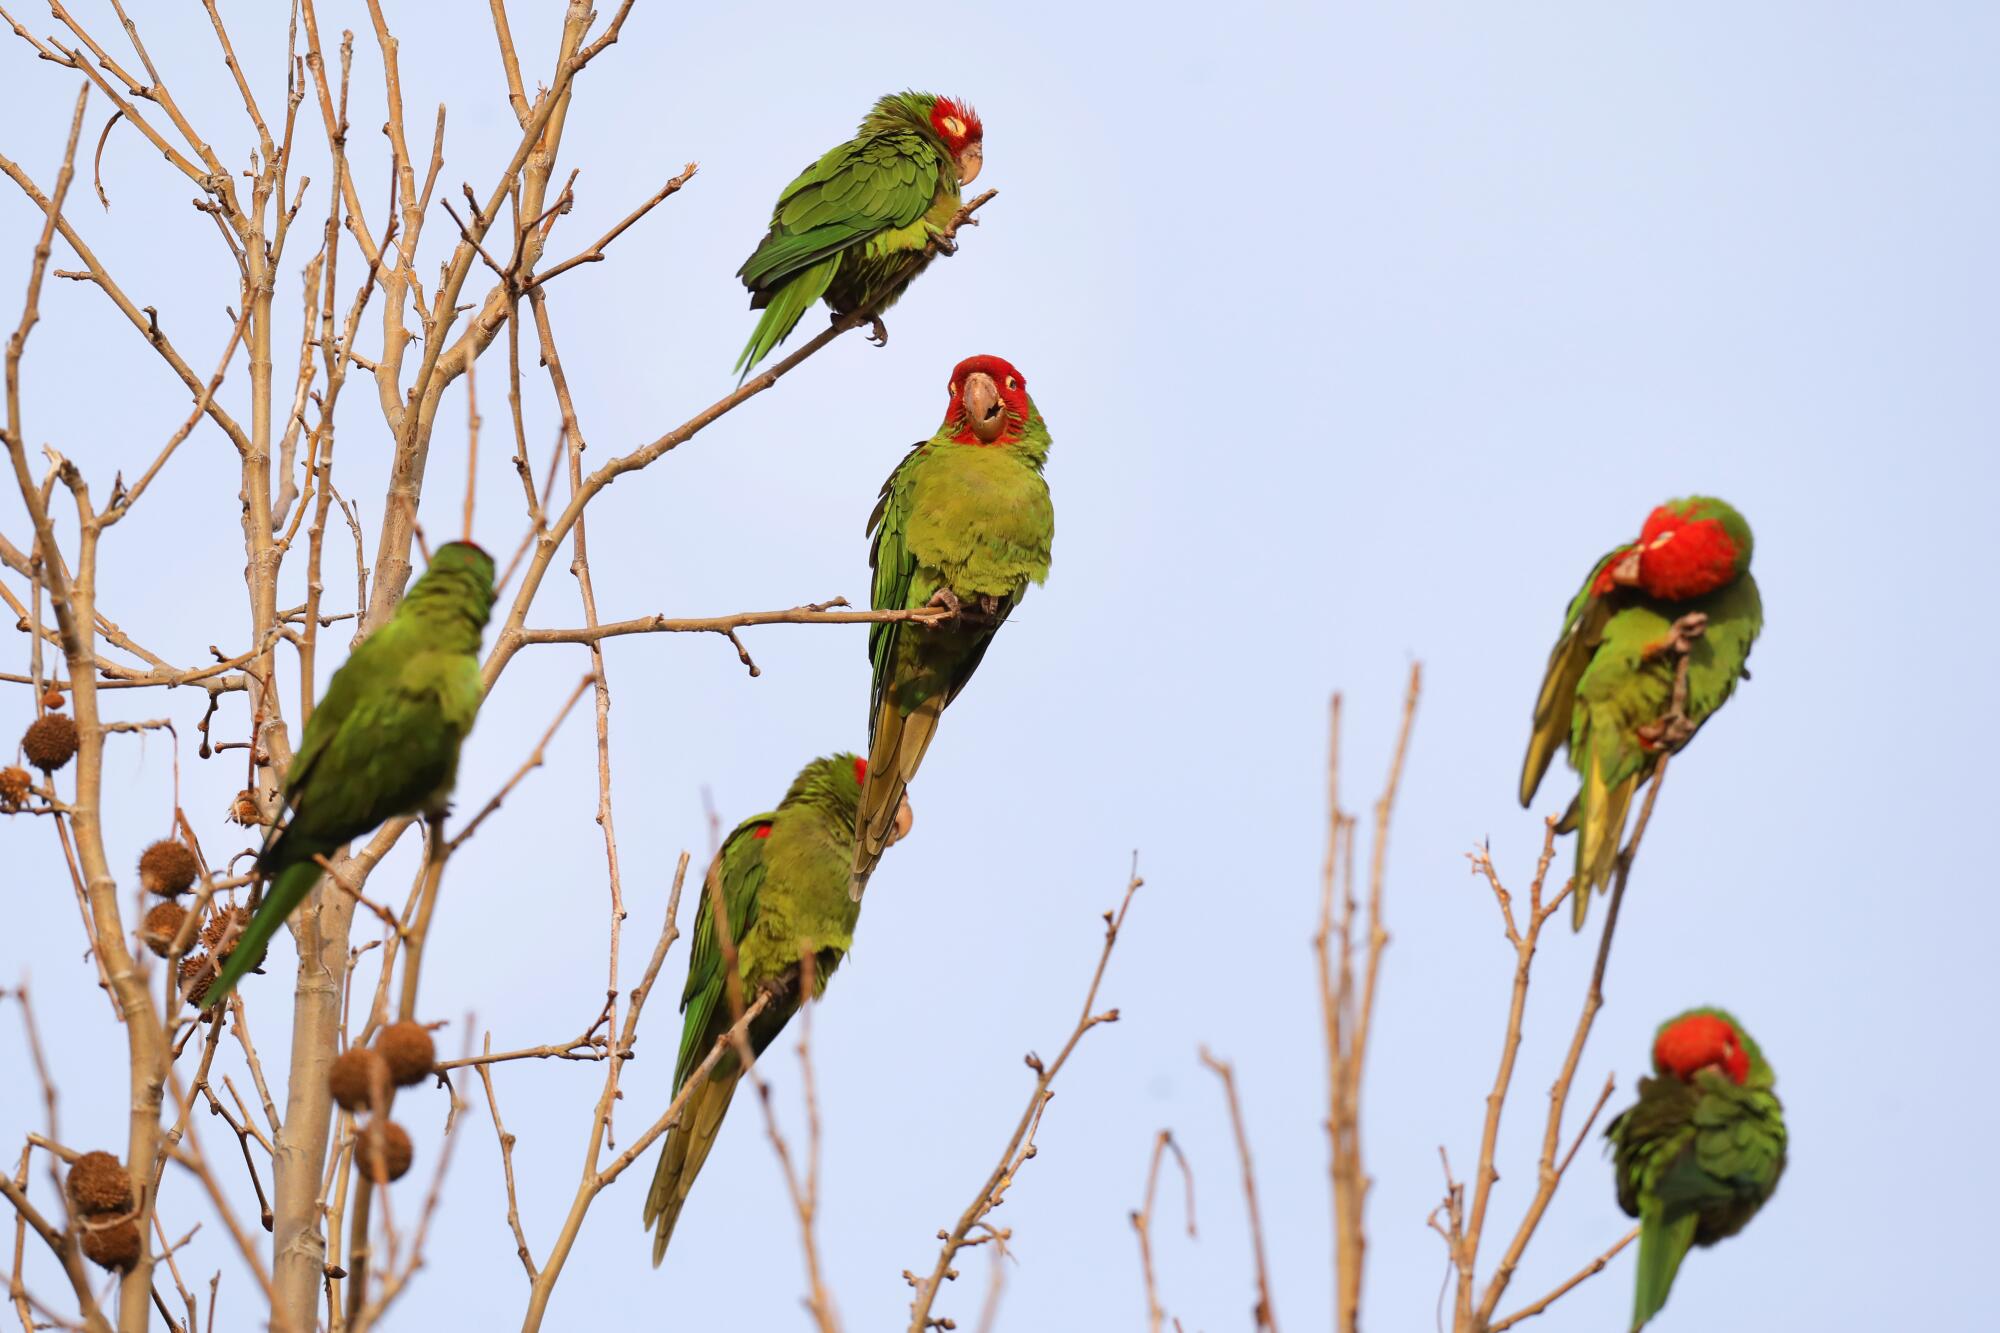 Seasonal parrots gather in a roost in Temple City in January 2023.